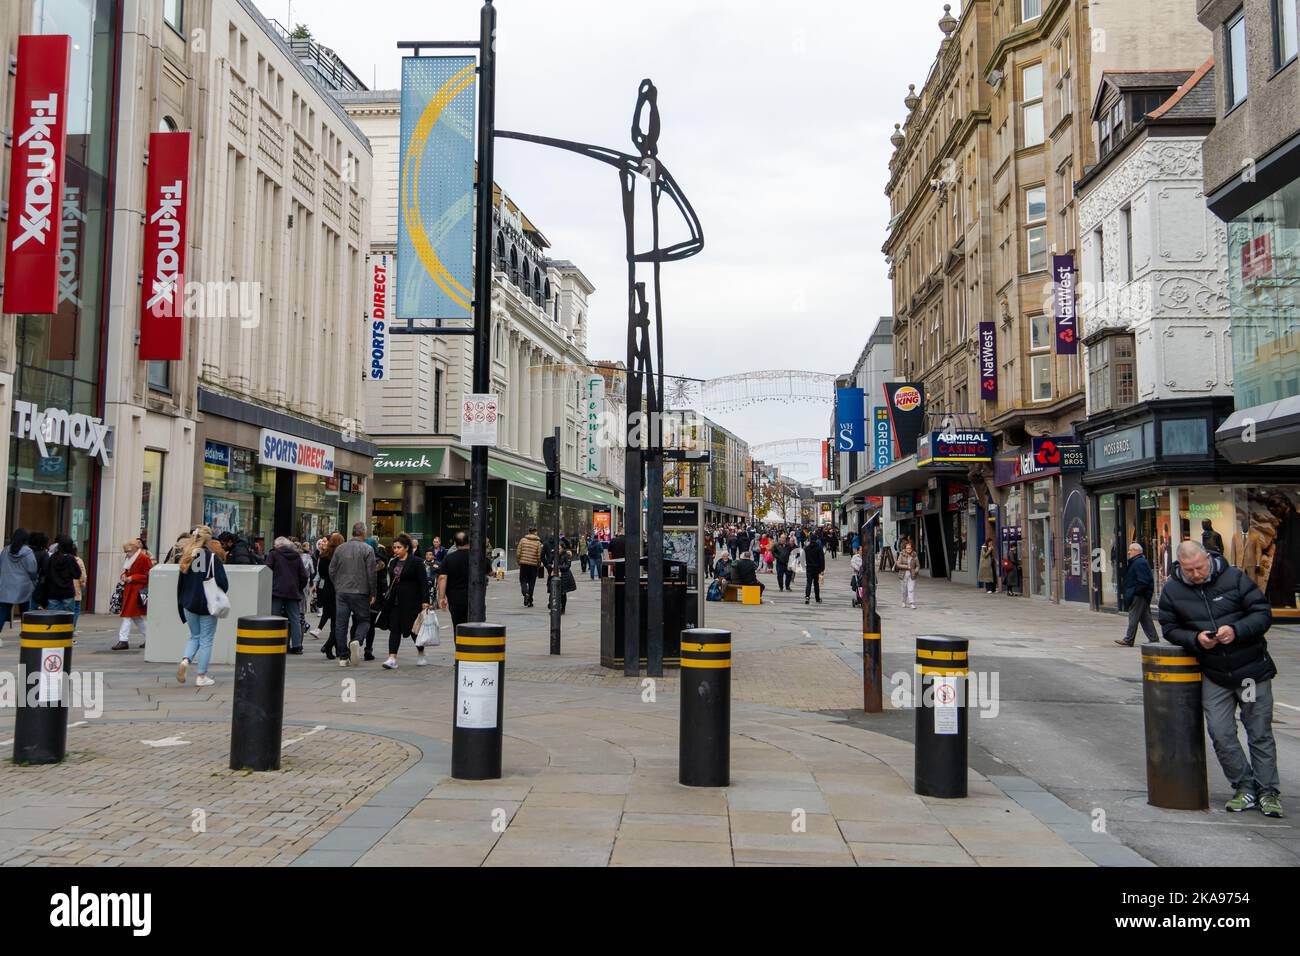 A view of Northumberland Street in the city of Newcastle upon Tyne, UK, with people shopping. Stock Photo